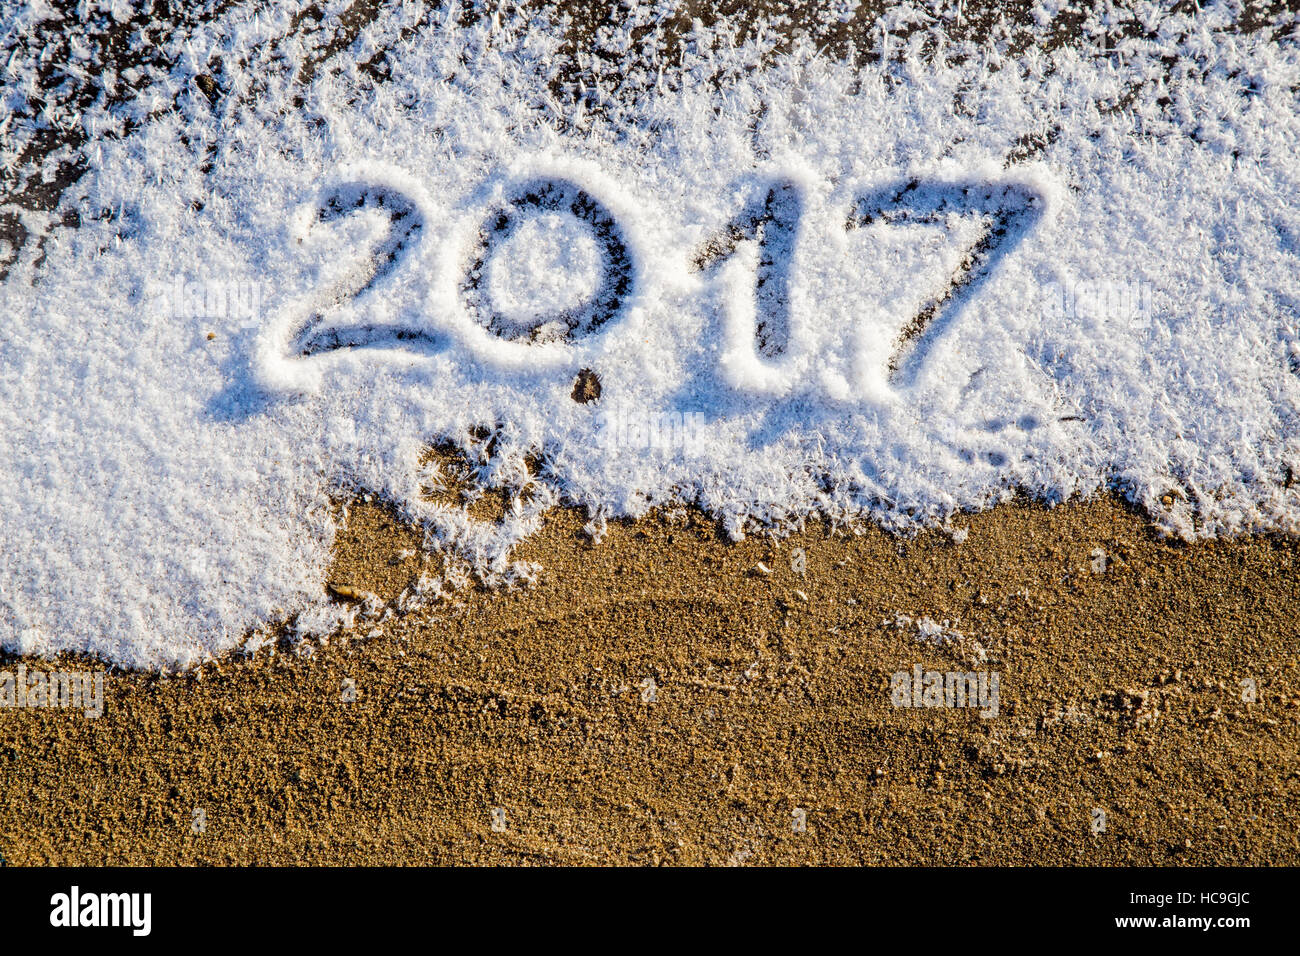 New Year 2017 greeting,  numbers written on snow field, Stock Photo